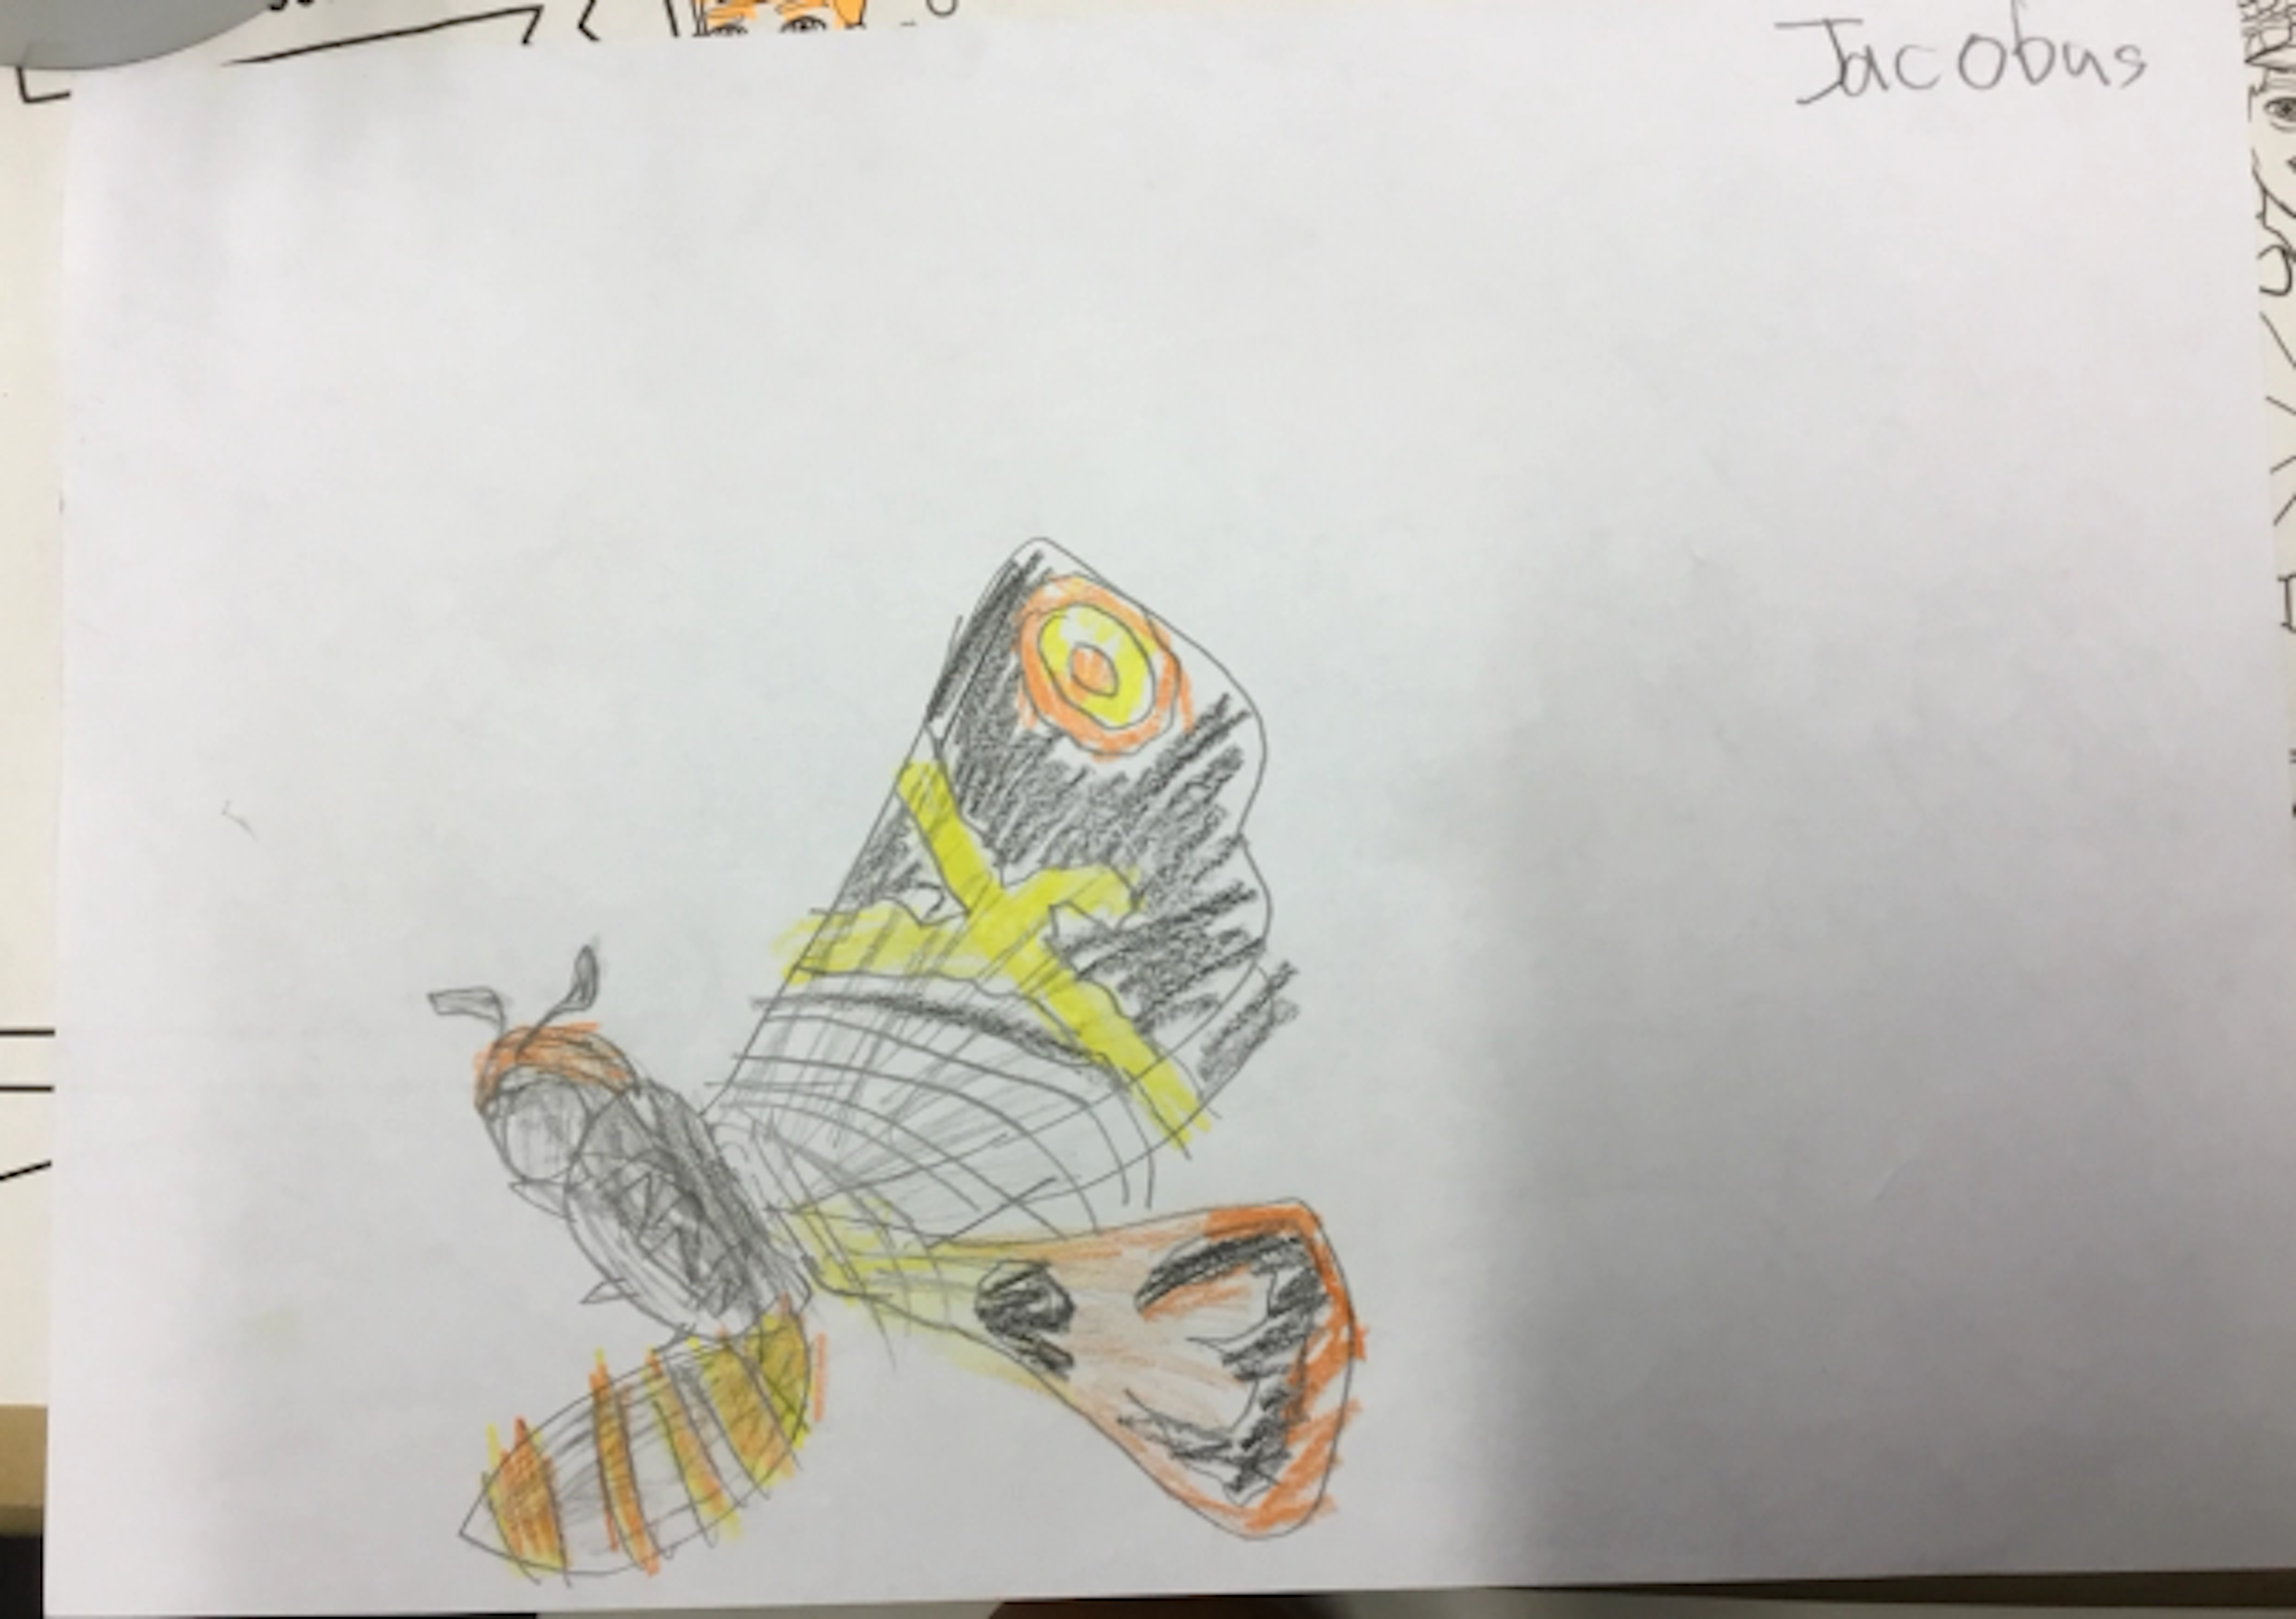 I drew a detailed picture of Showa Mothra